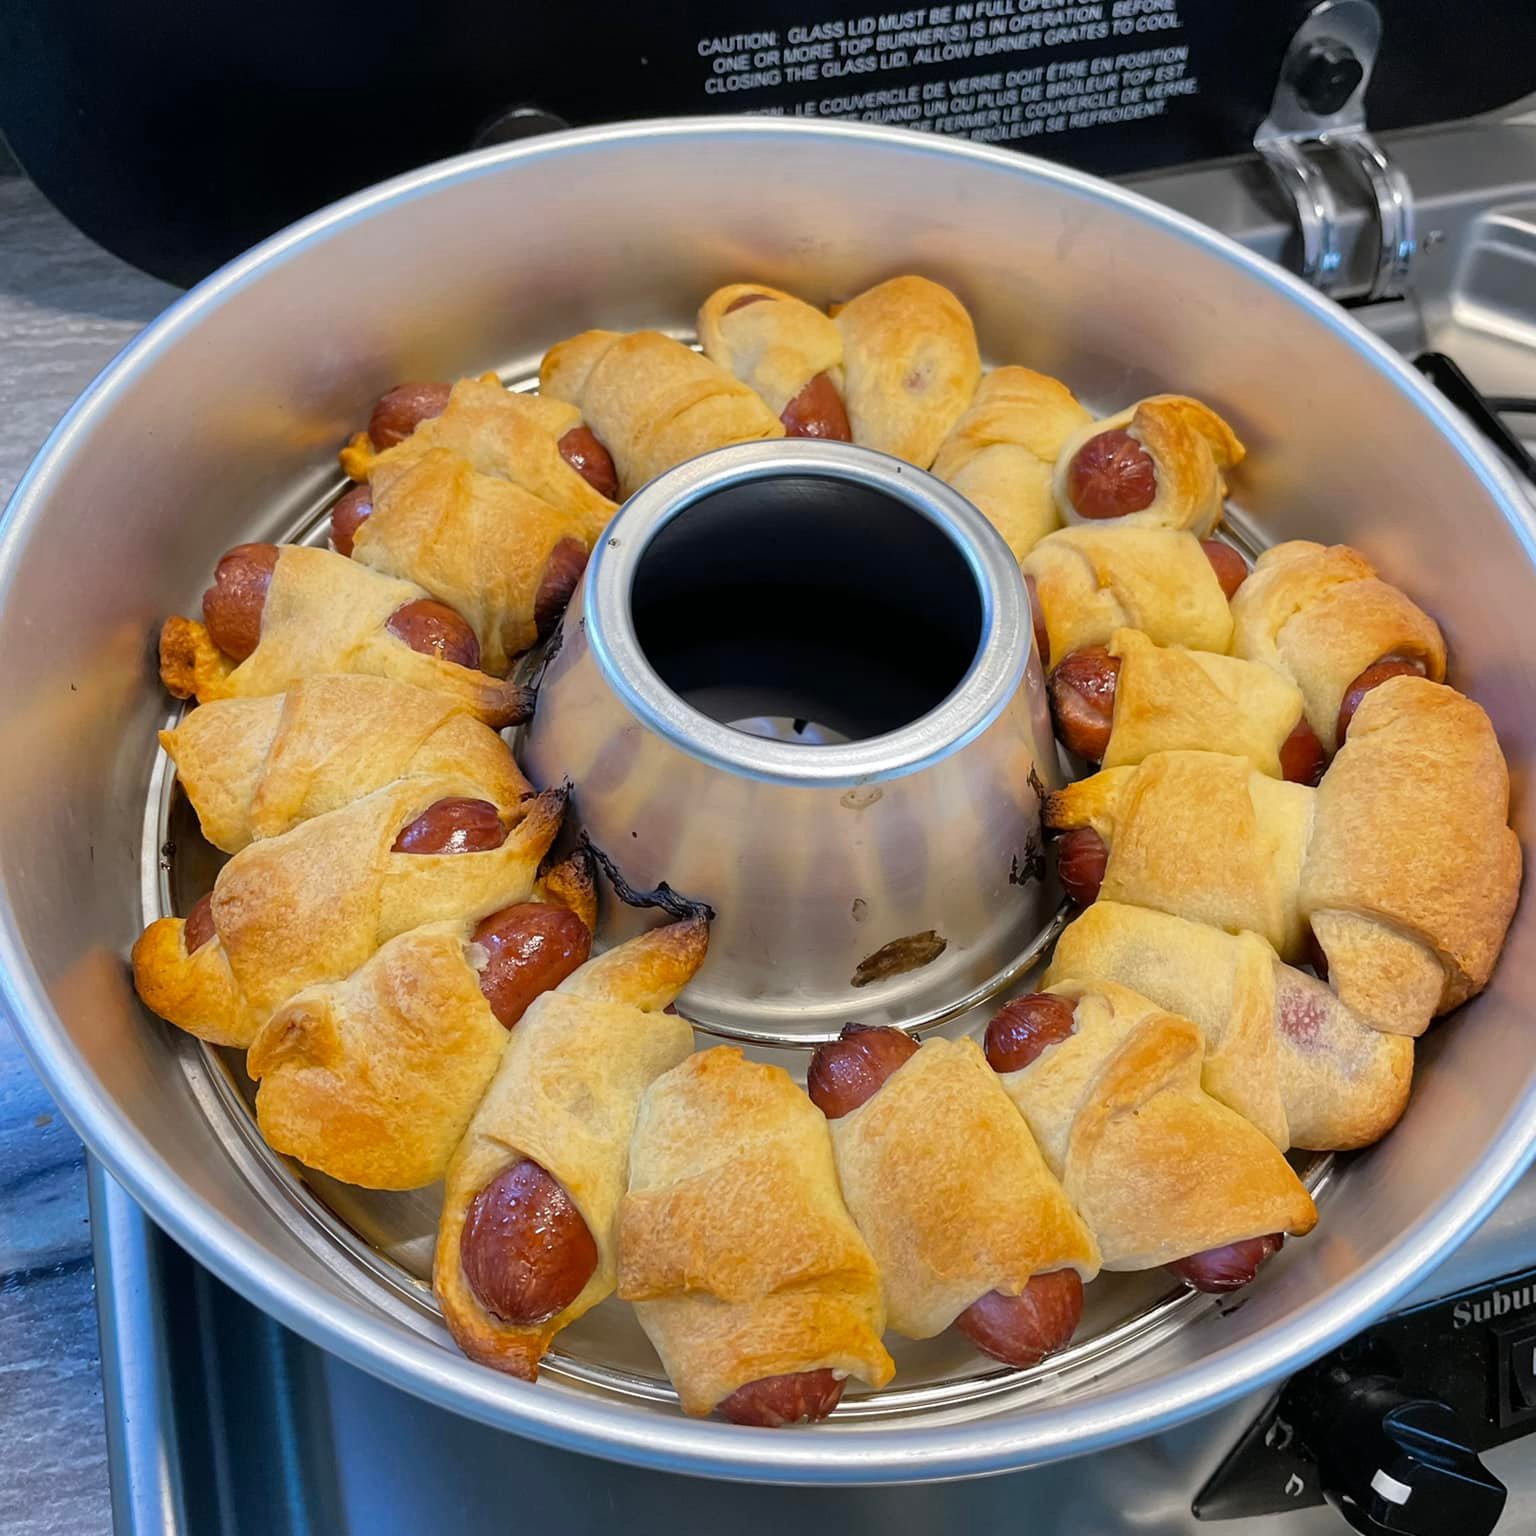 https://images.squarespace-cdn.com/content/v1/5aad3b68697a98cf4d0aa9ba/1679333807645-O9ACEXDXN5SCOPFOUX1C/Omnia+oven+weenie+bake.jpg